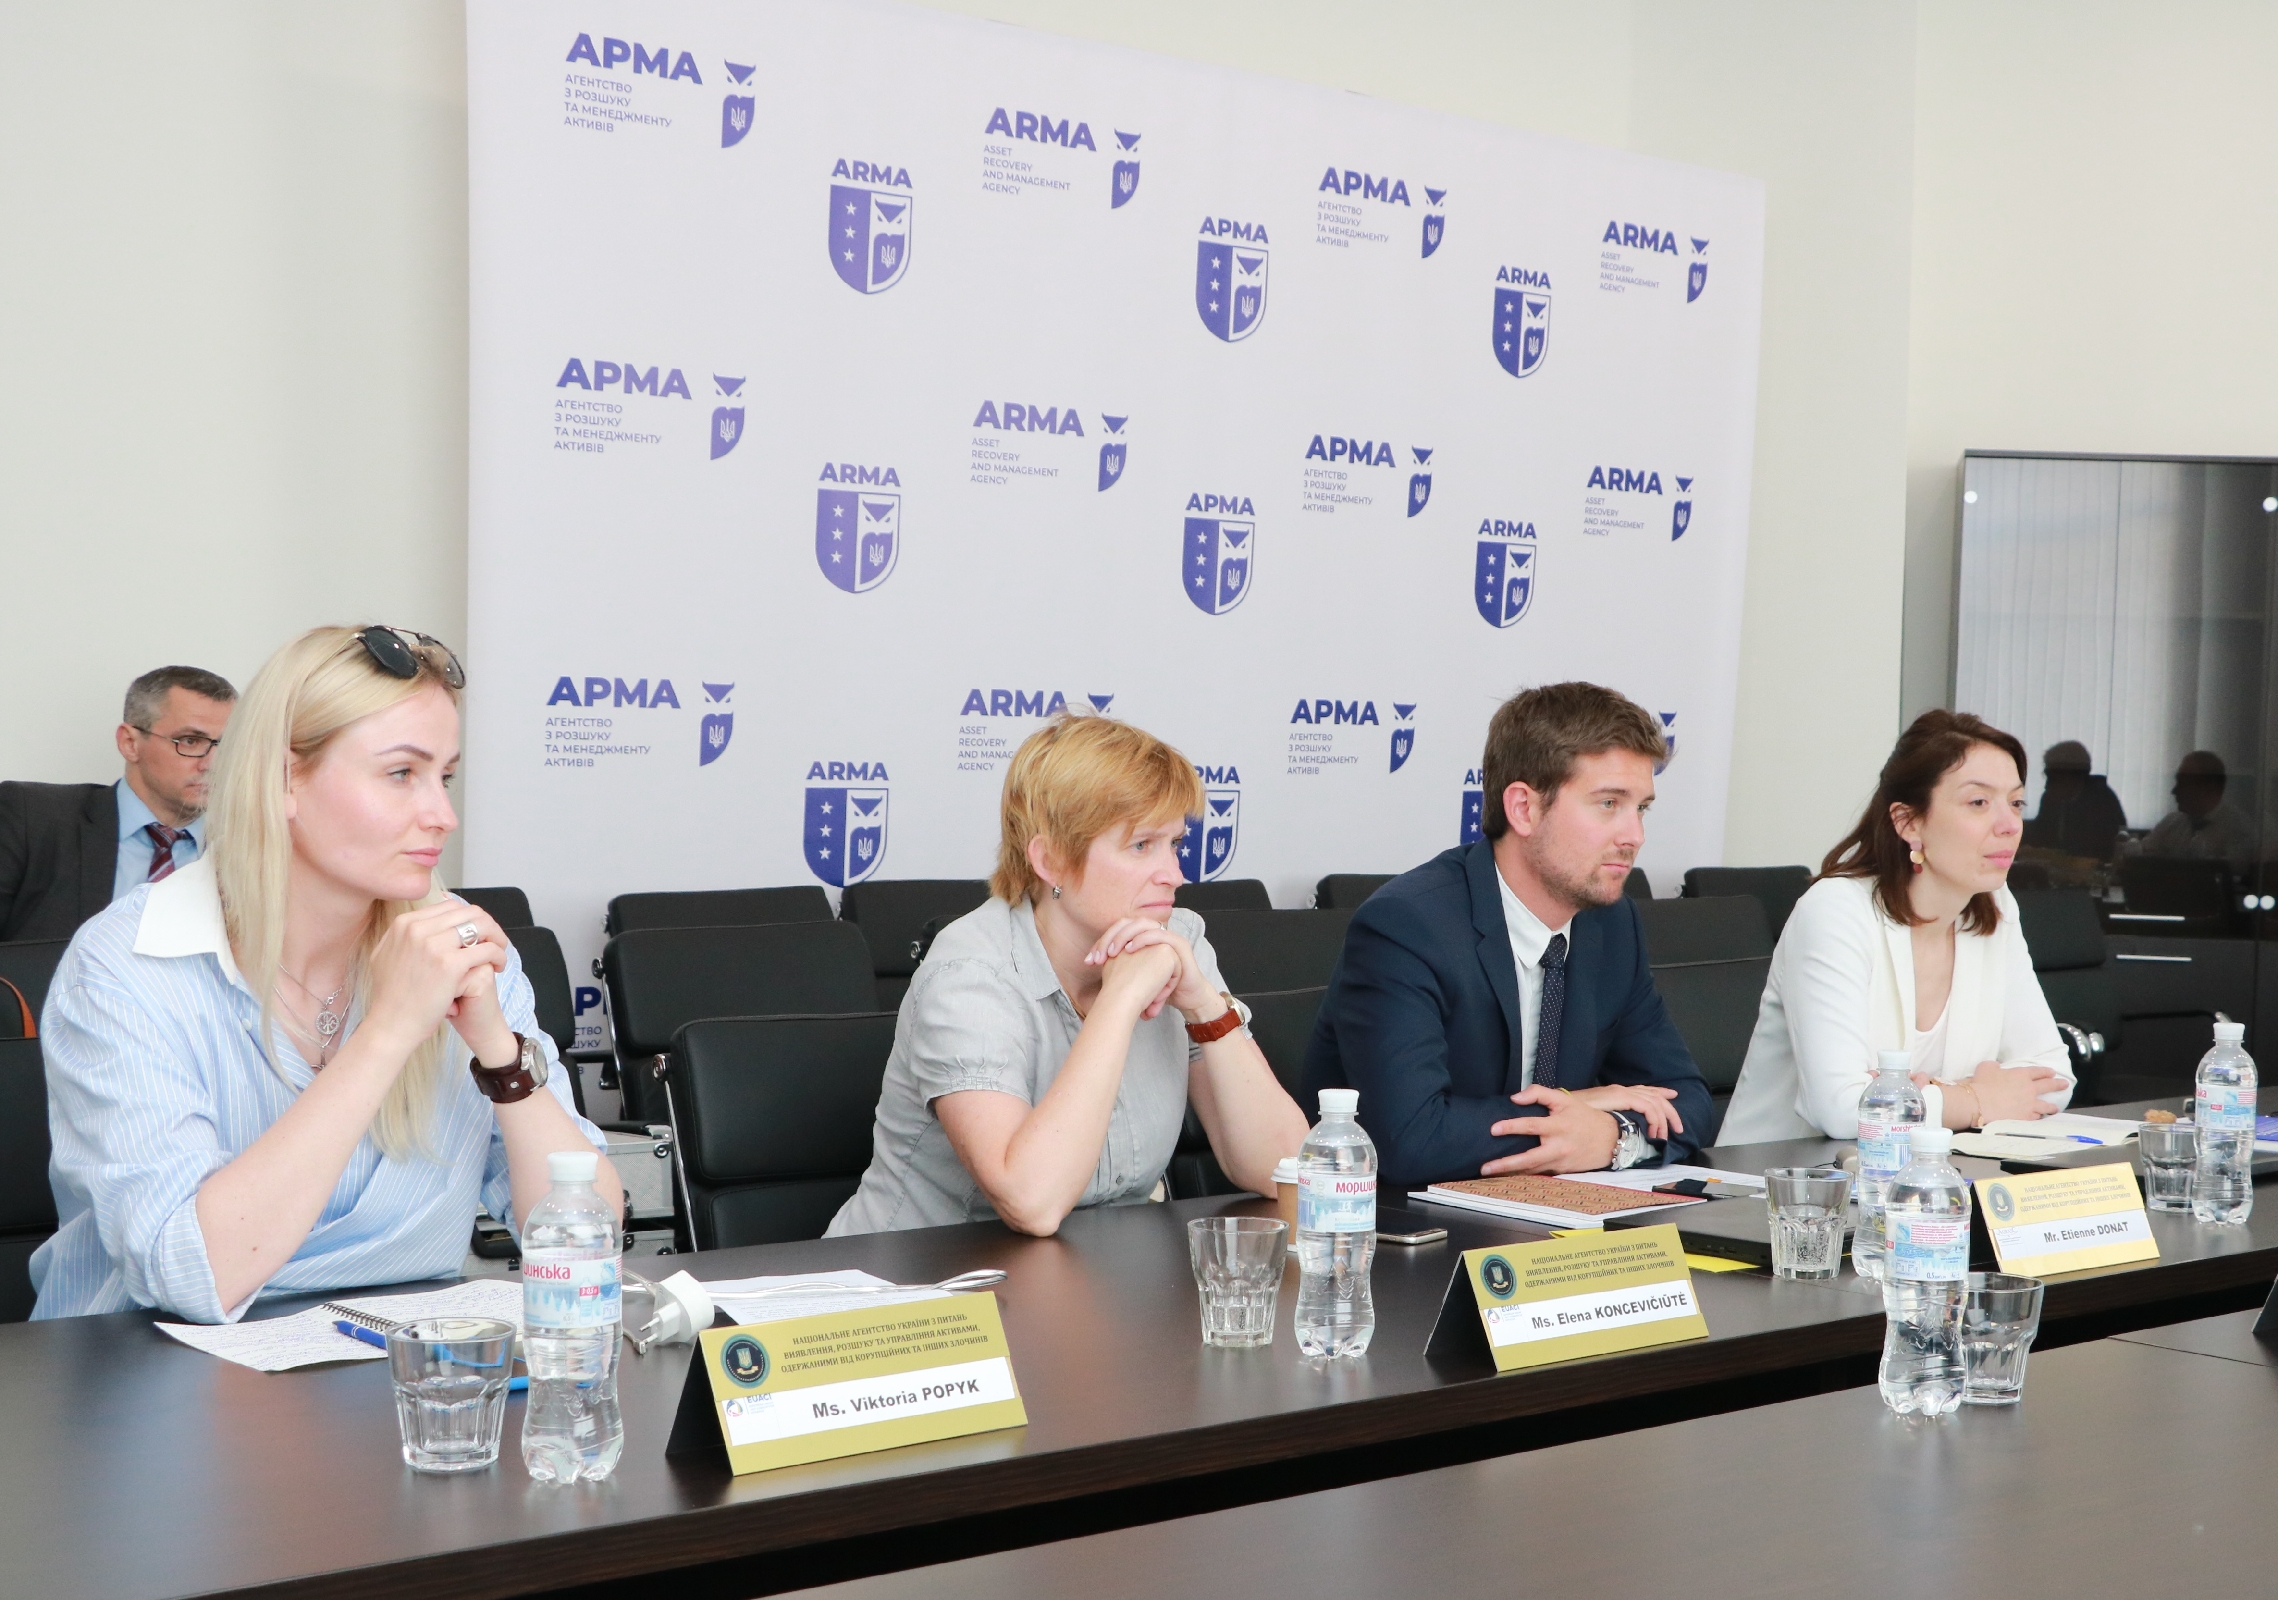 Representatives of AGRASC visited ARMA with EUACI's support